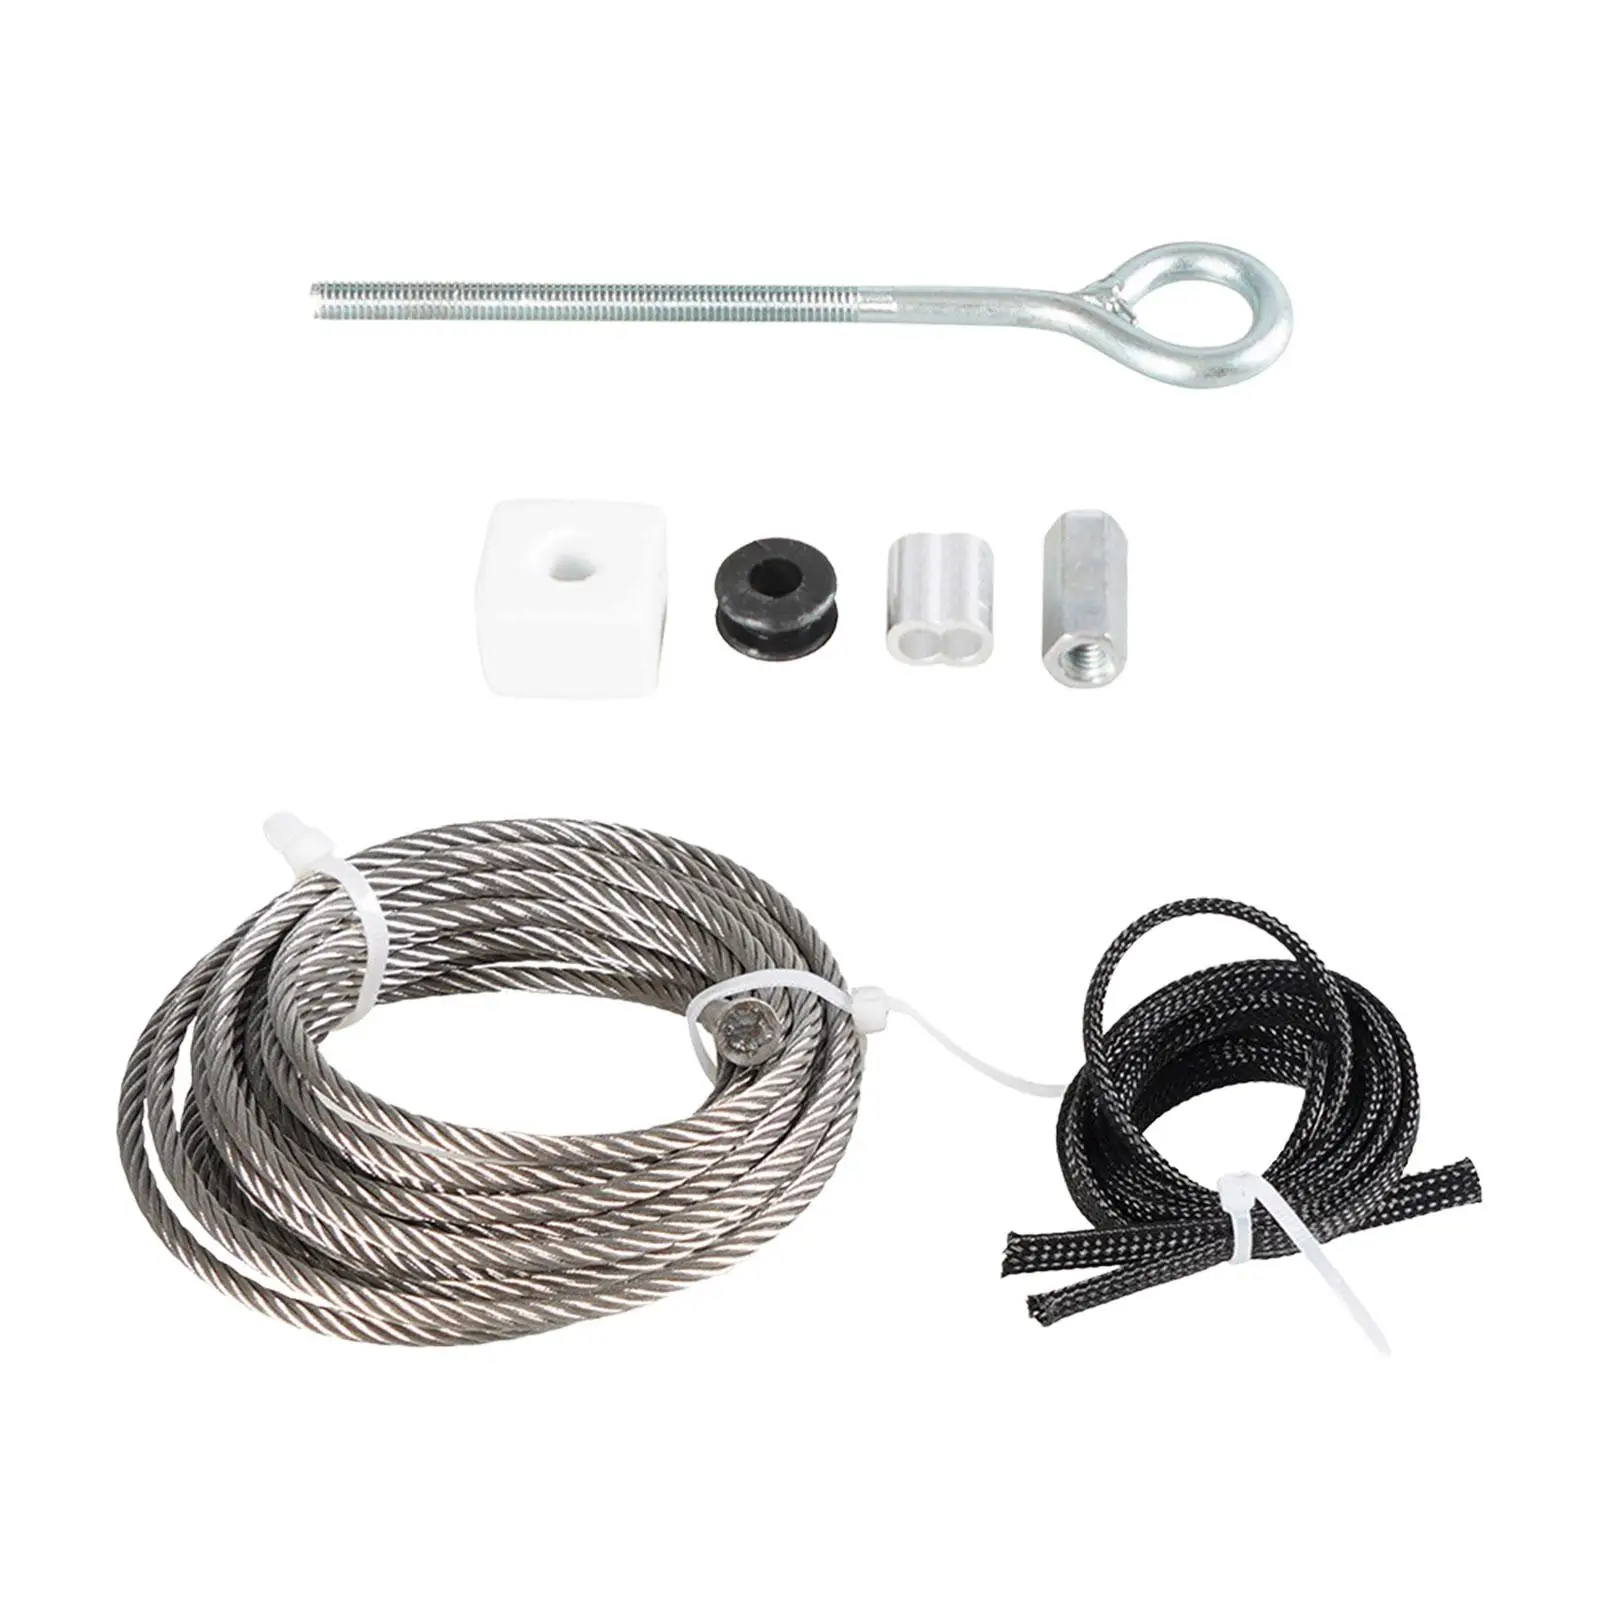 RV Cable Repair Set Easy to Install Assembly 22305 for Accuslide System